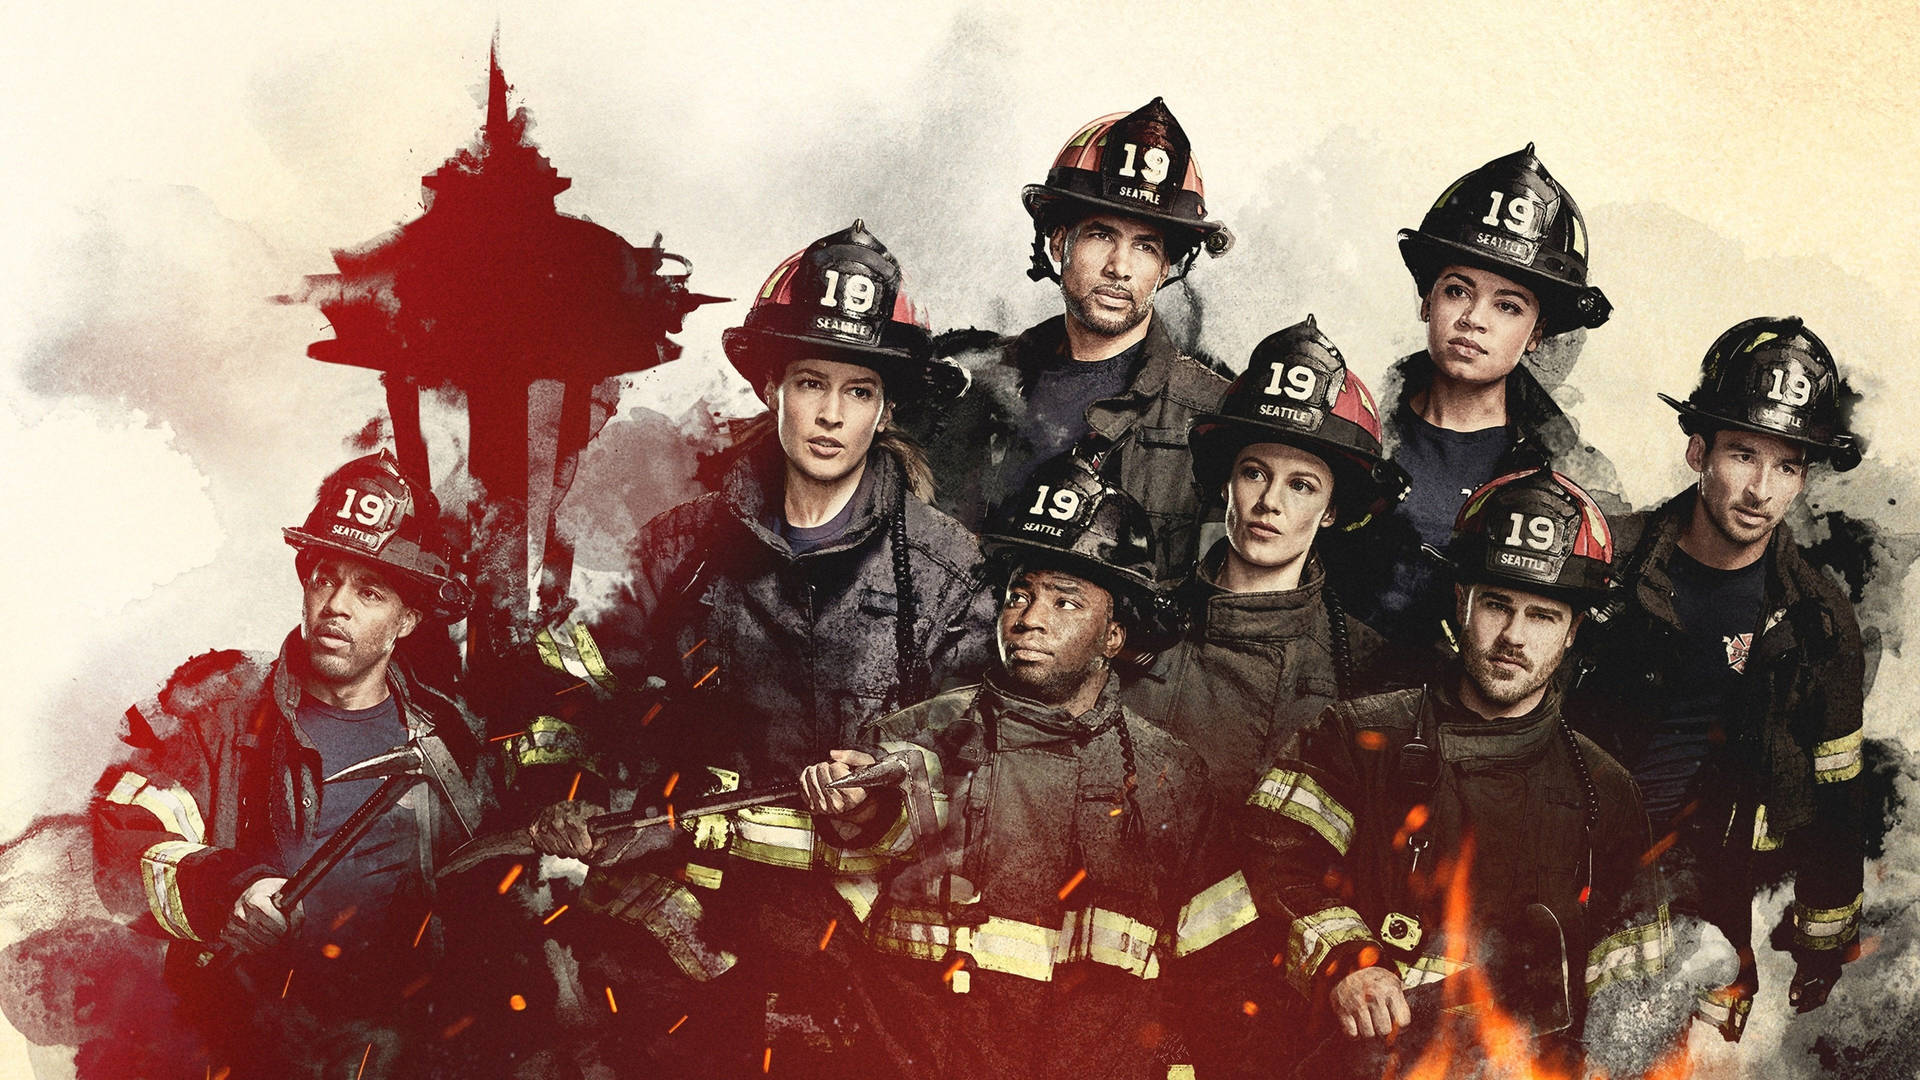 Station 19 Soldiers Wallpaper